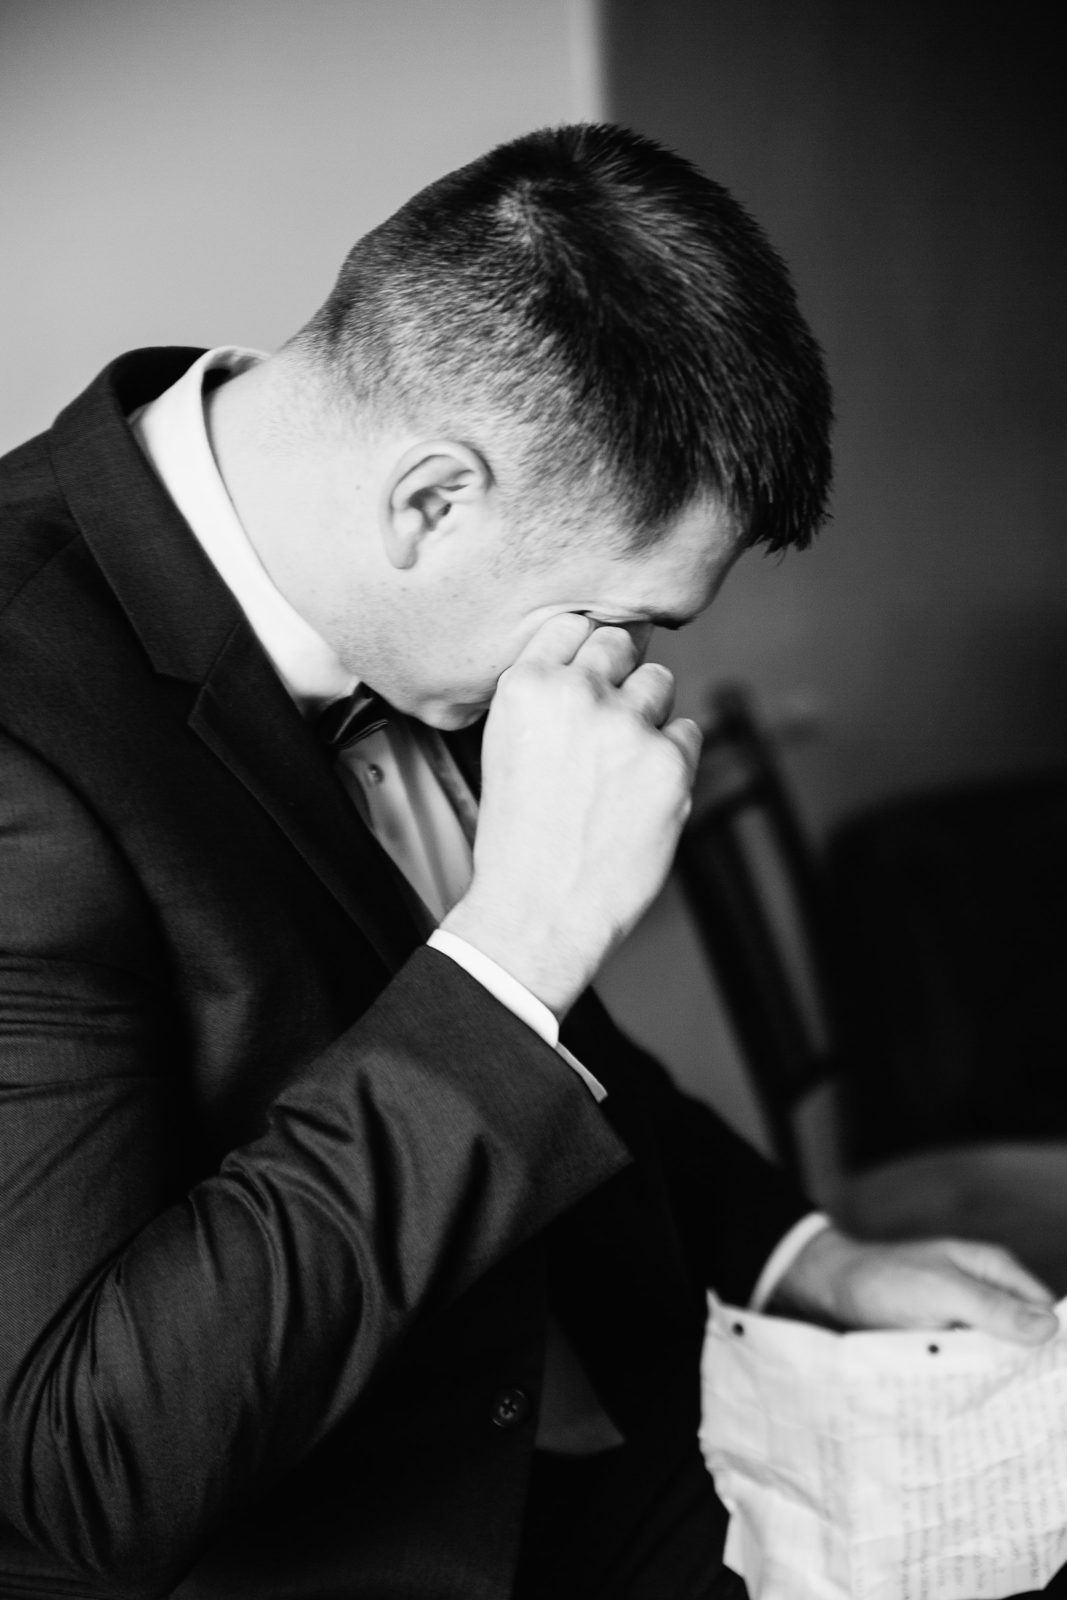 Groom crying while reading a letter from his bride before the ceremony by Arizona wedding photographer PMA Photography.